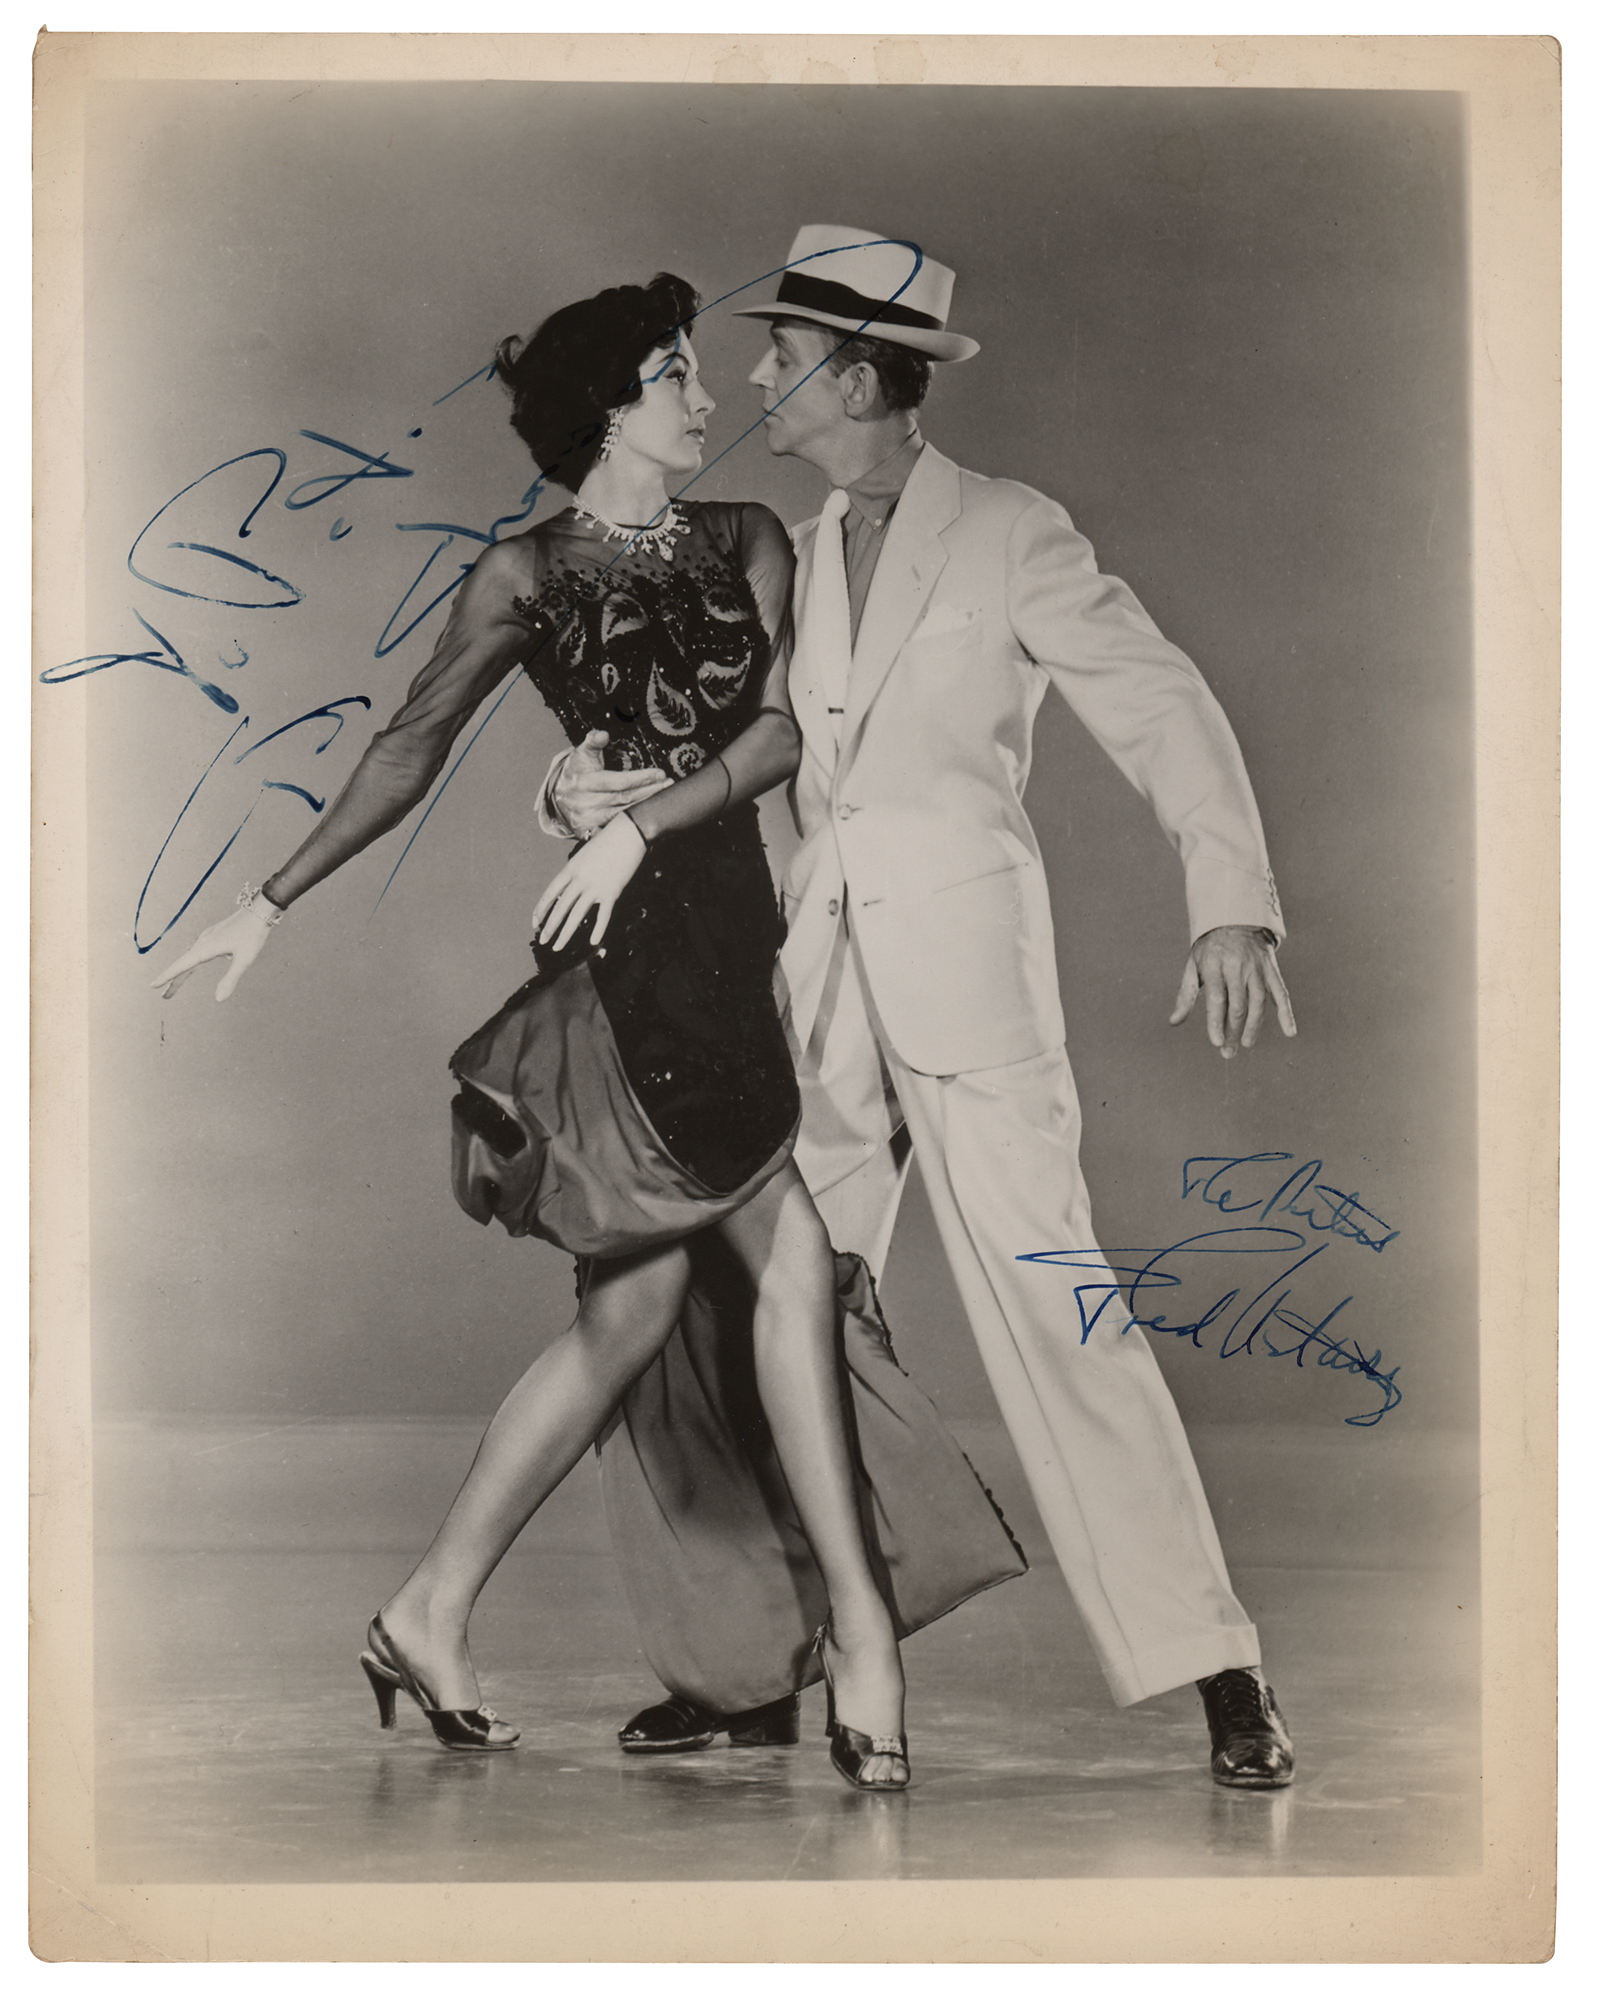 Lot #5134 Fred Astaire and Cyd Charisse Signed Photograph - Image 1